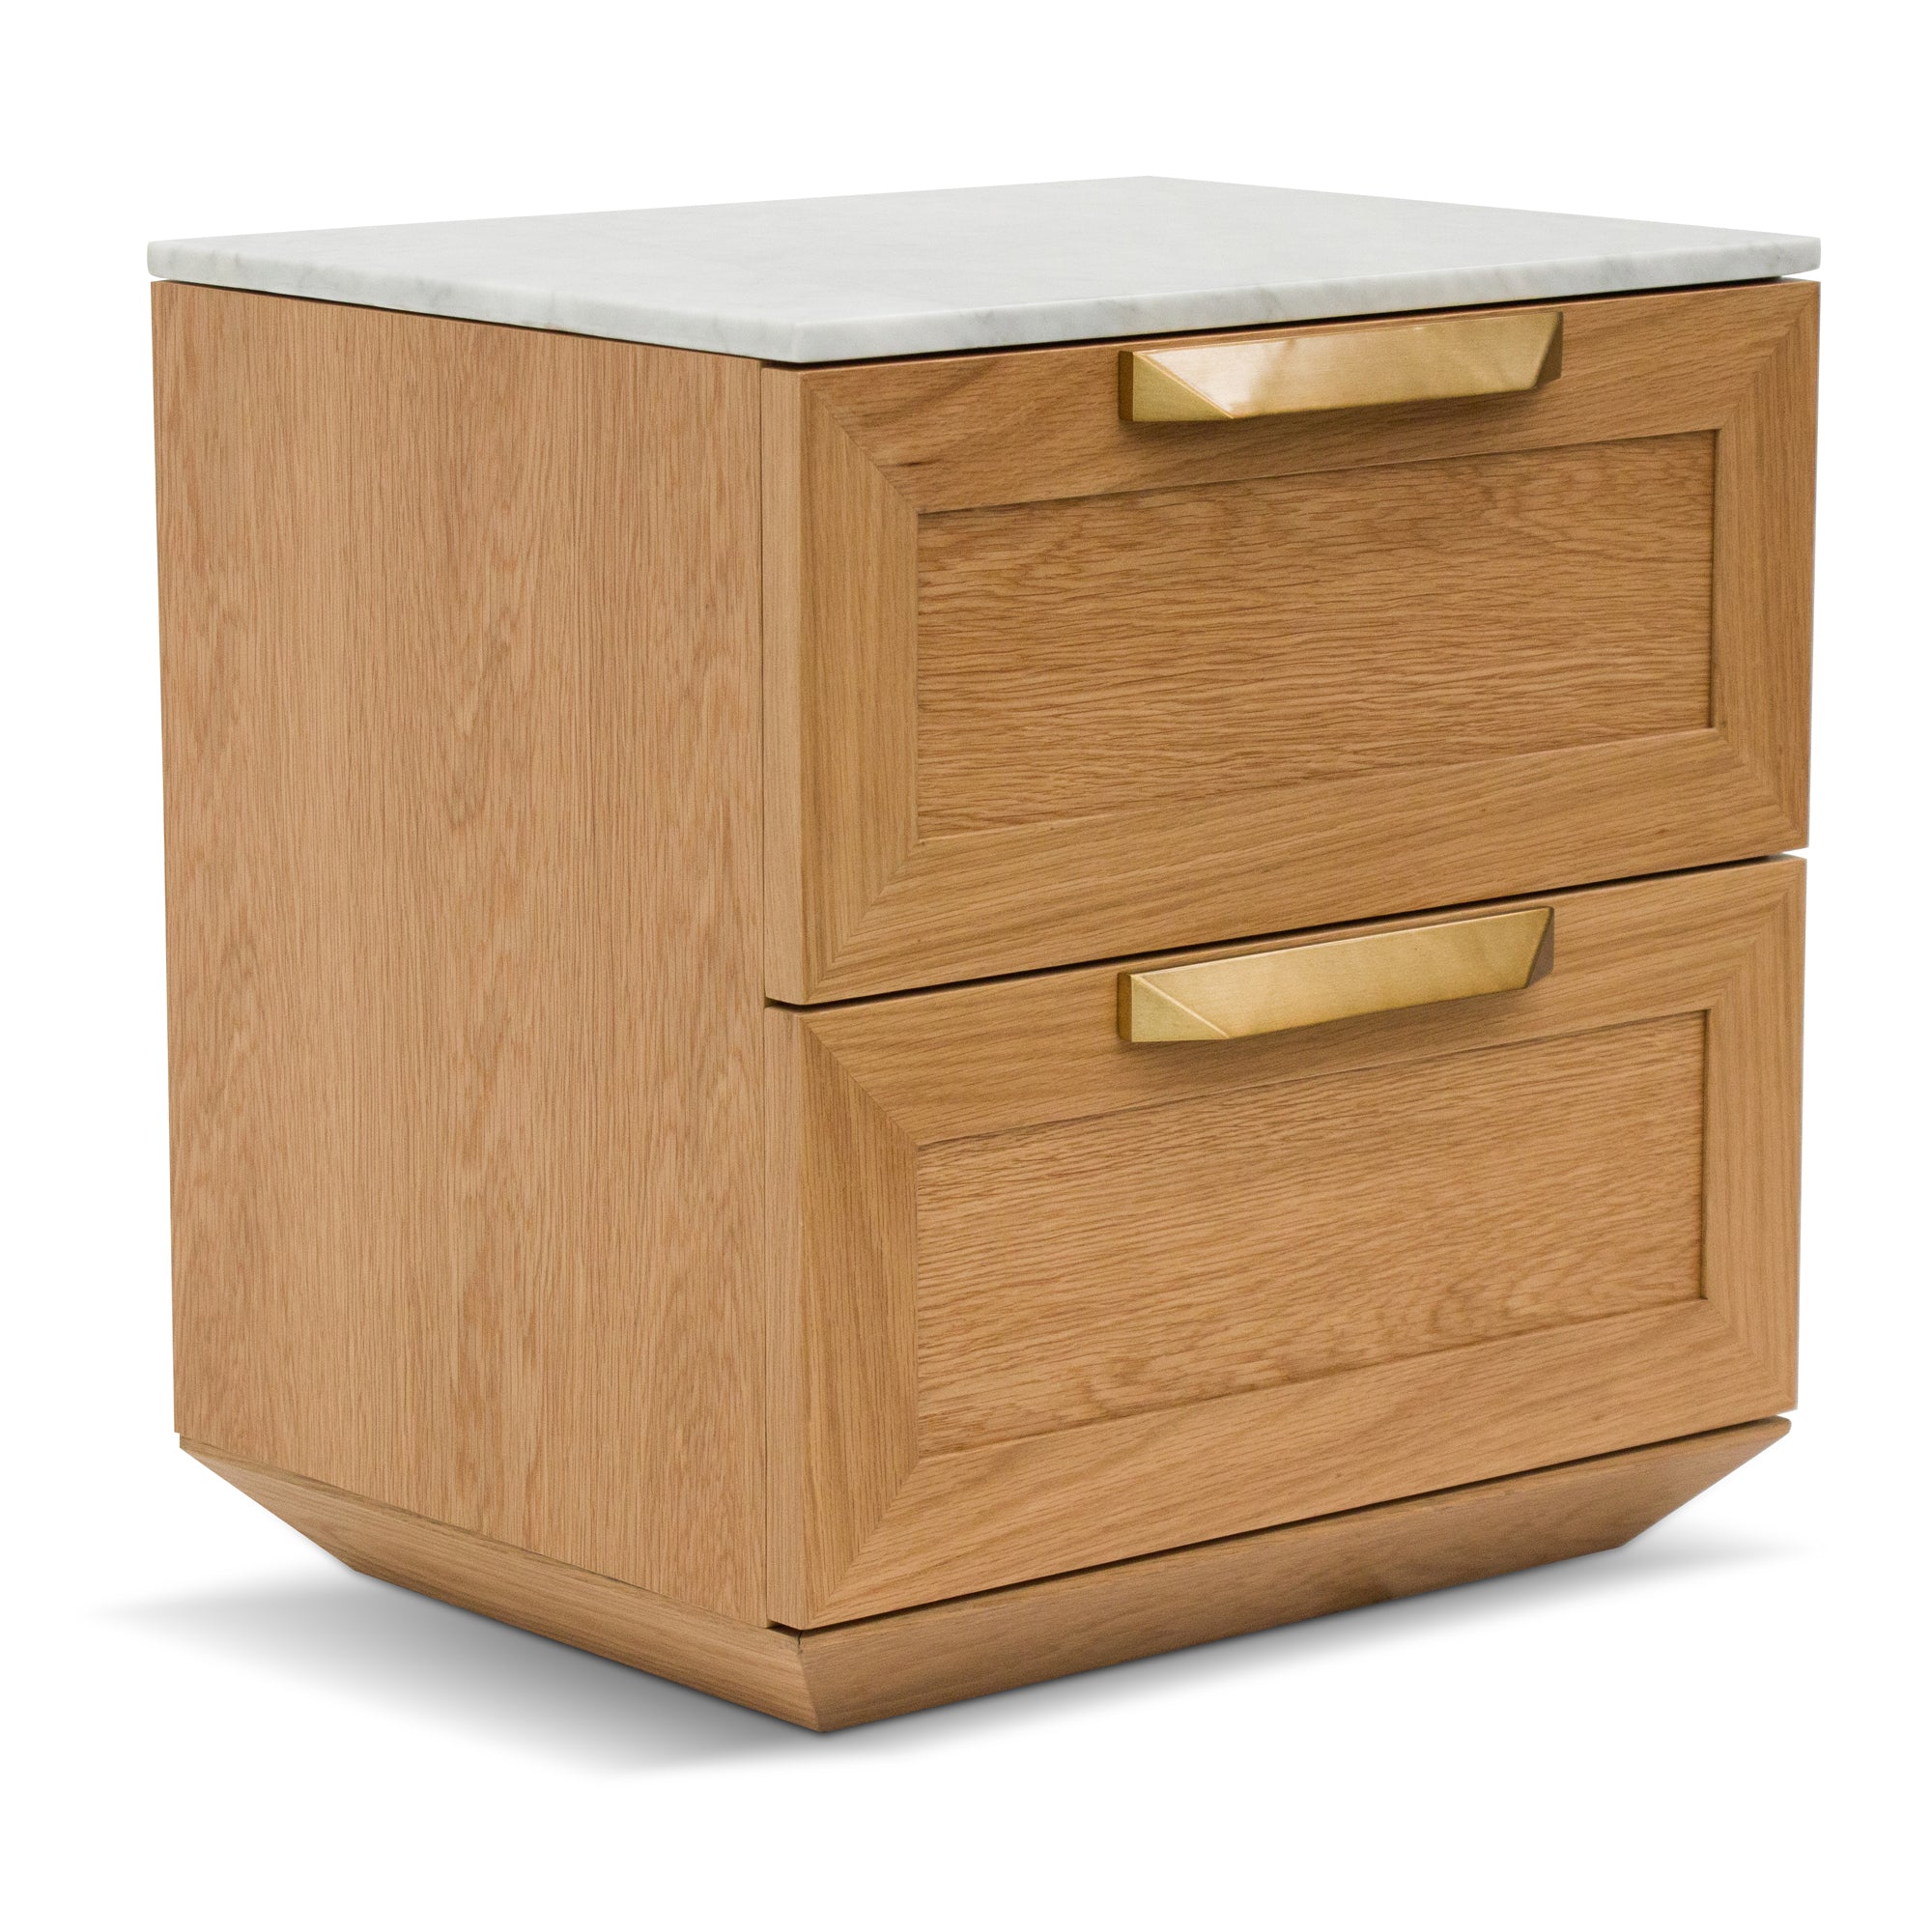 Selena Bedside Table - Natural with Marble Top - Bedside Tables